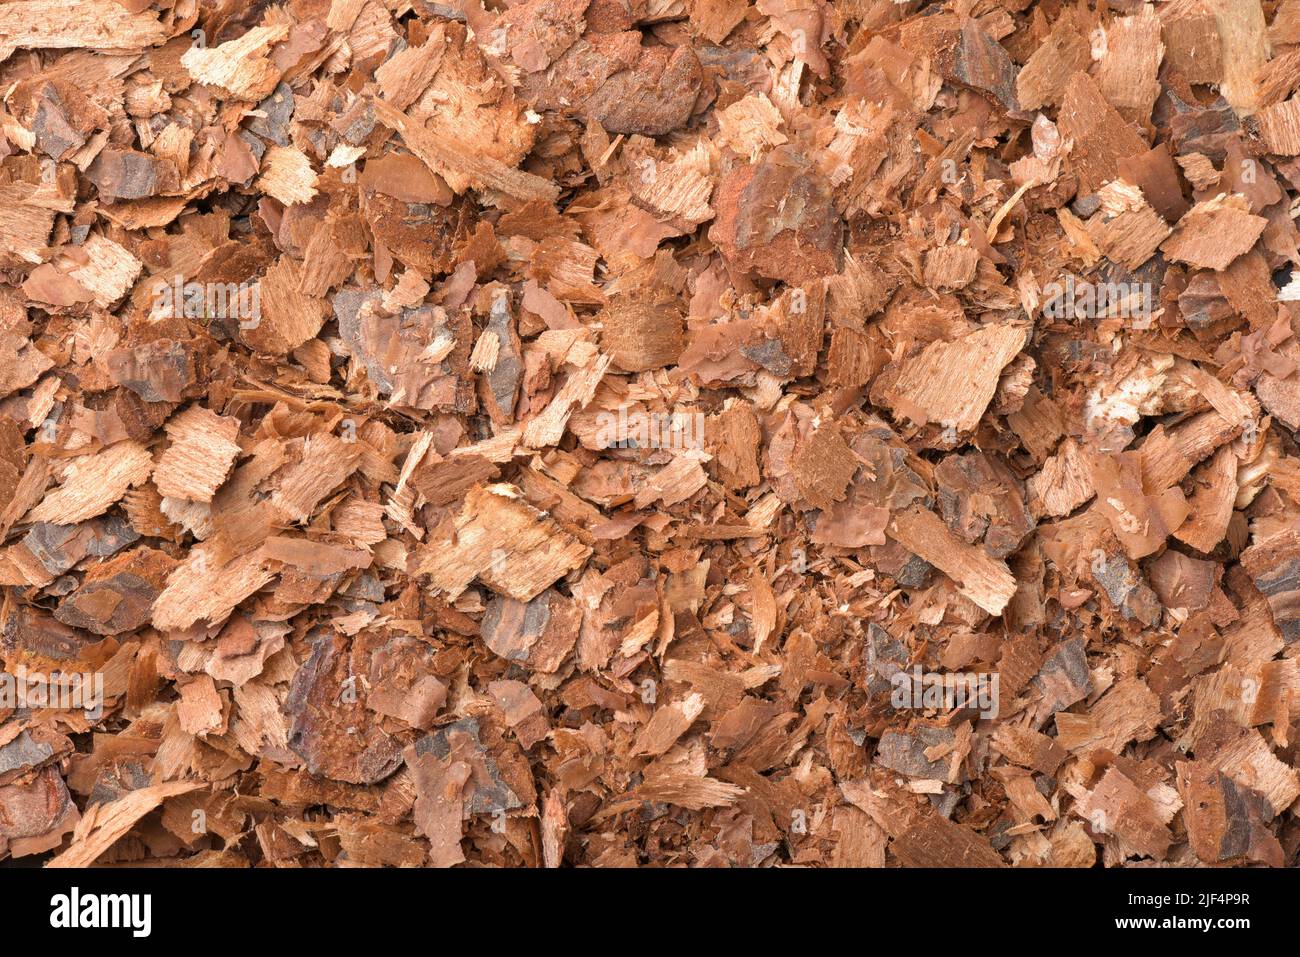 Top view of pine bark mulch chips texture Stock Photo